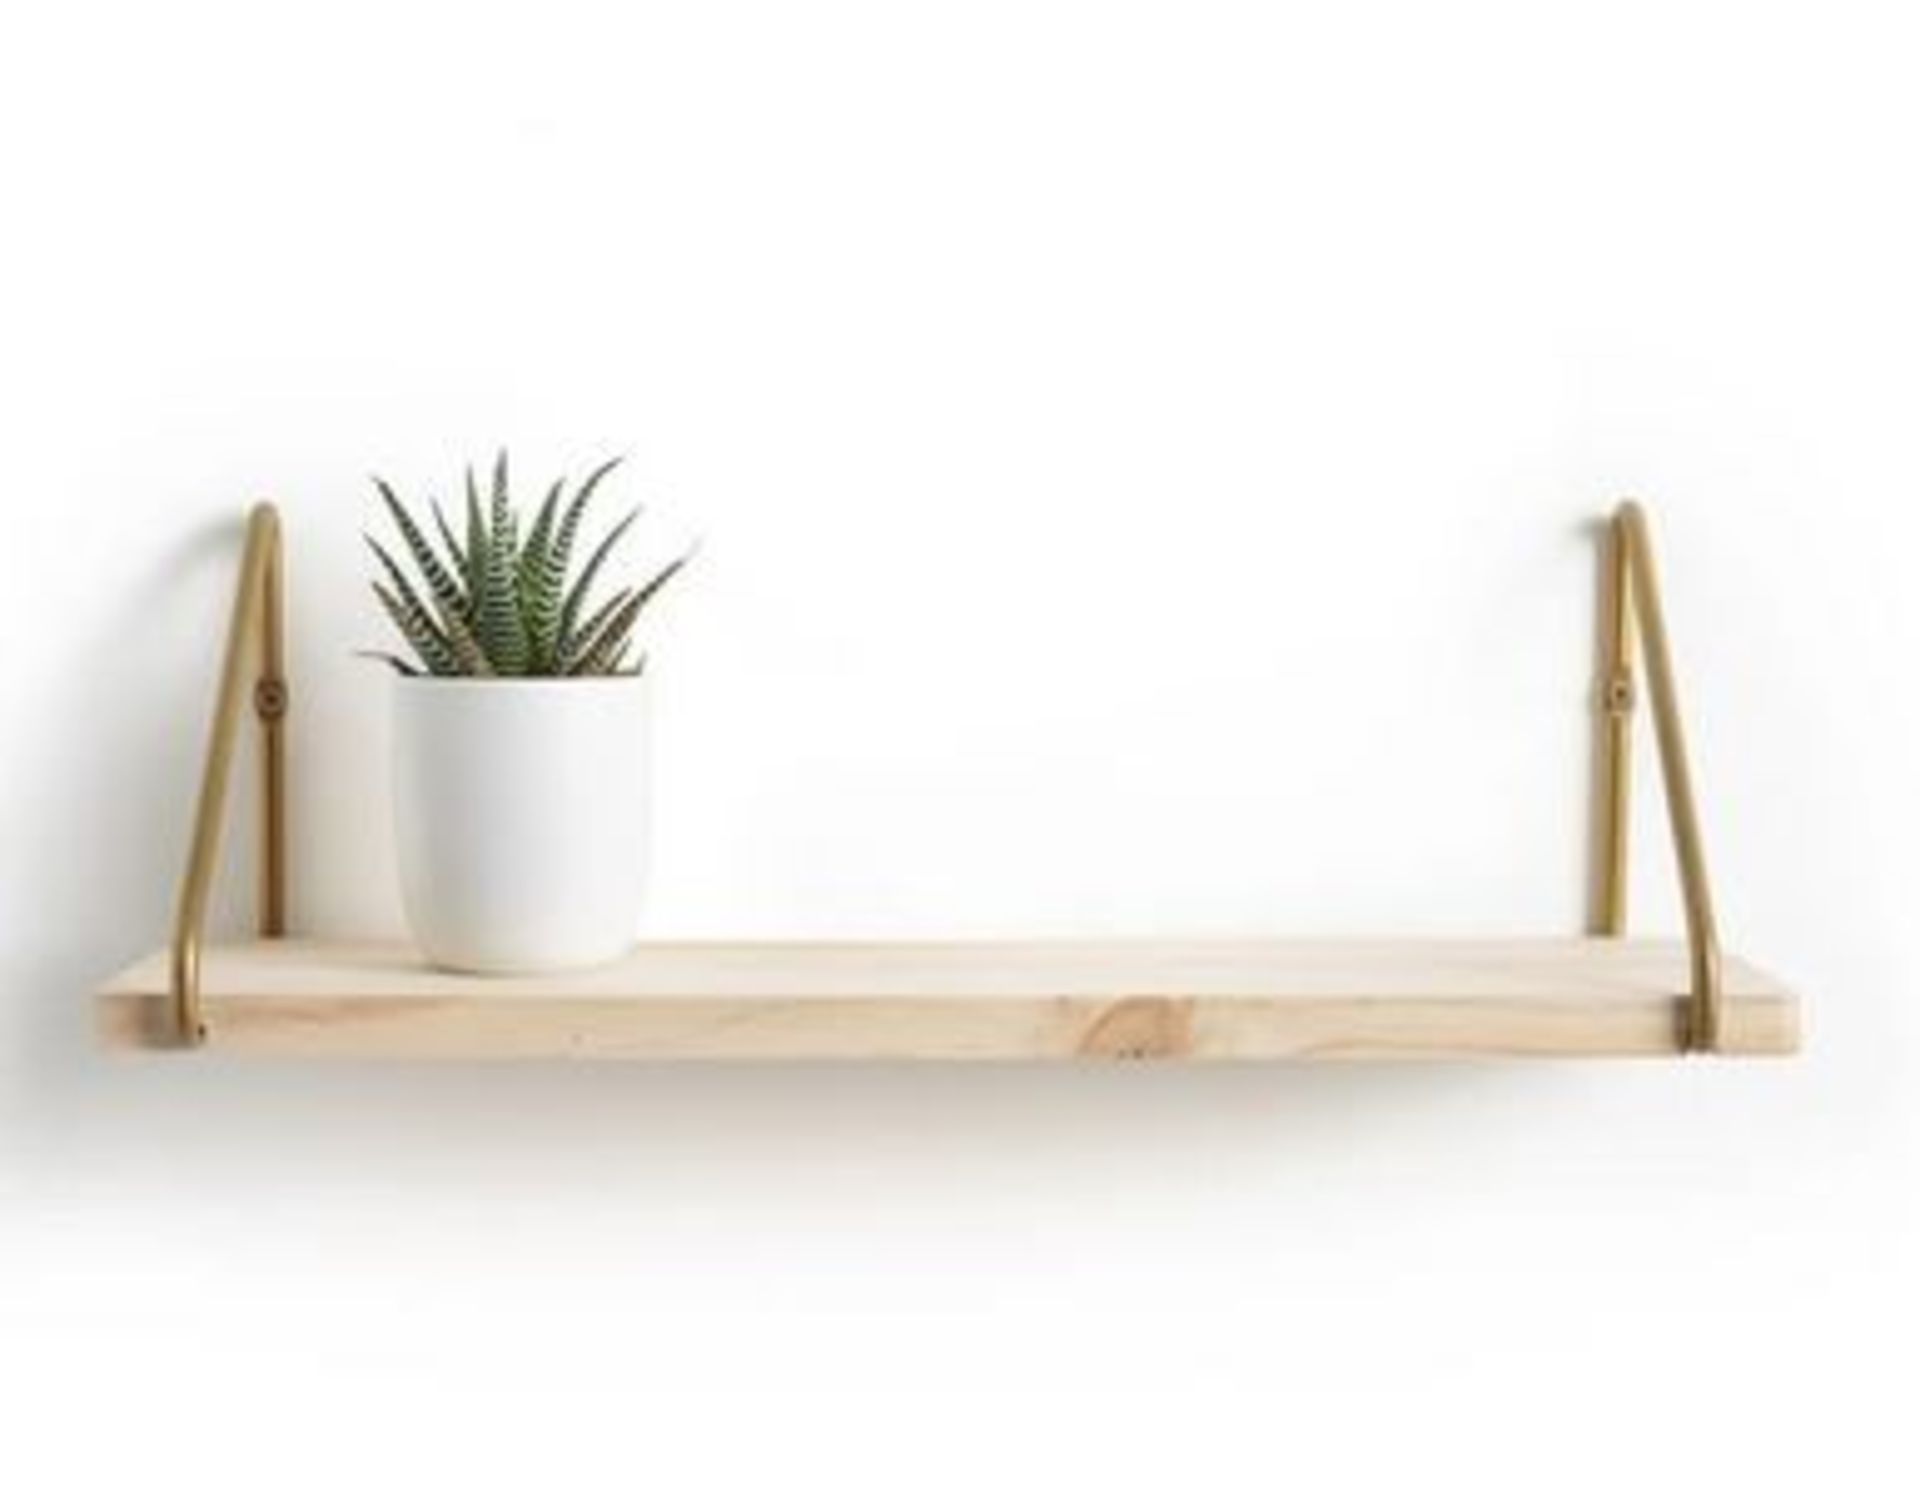 1 X LA REDOUTE VINTO PINE AND METAL WALL SHELF IN NATURAL AND BRASS 50CM / RRP £26.00 / GRADE A